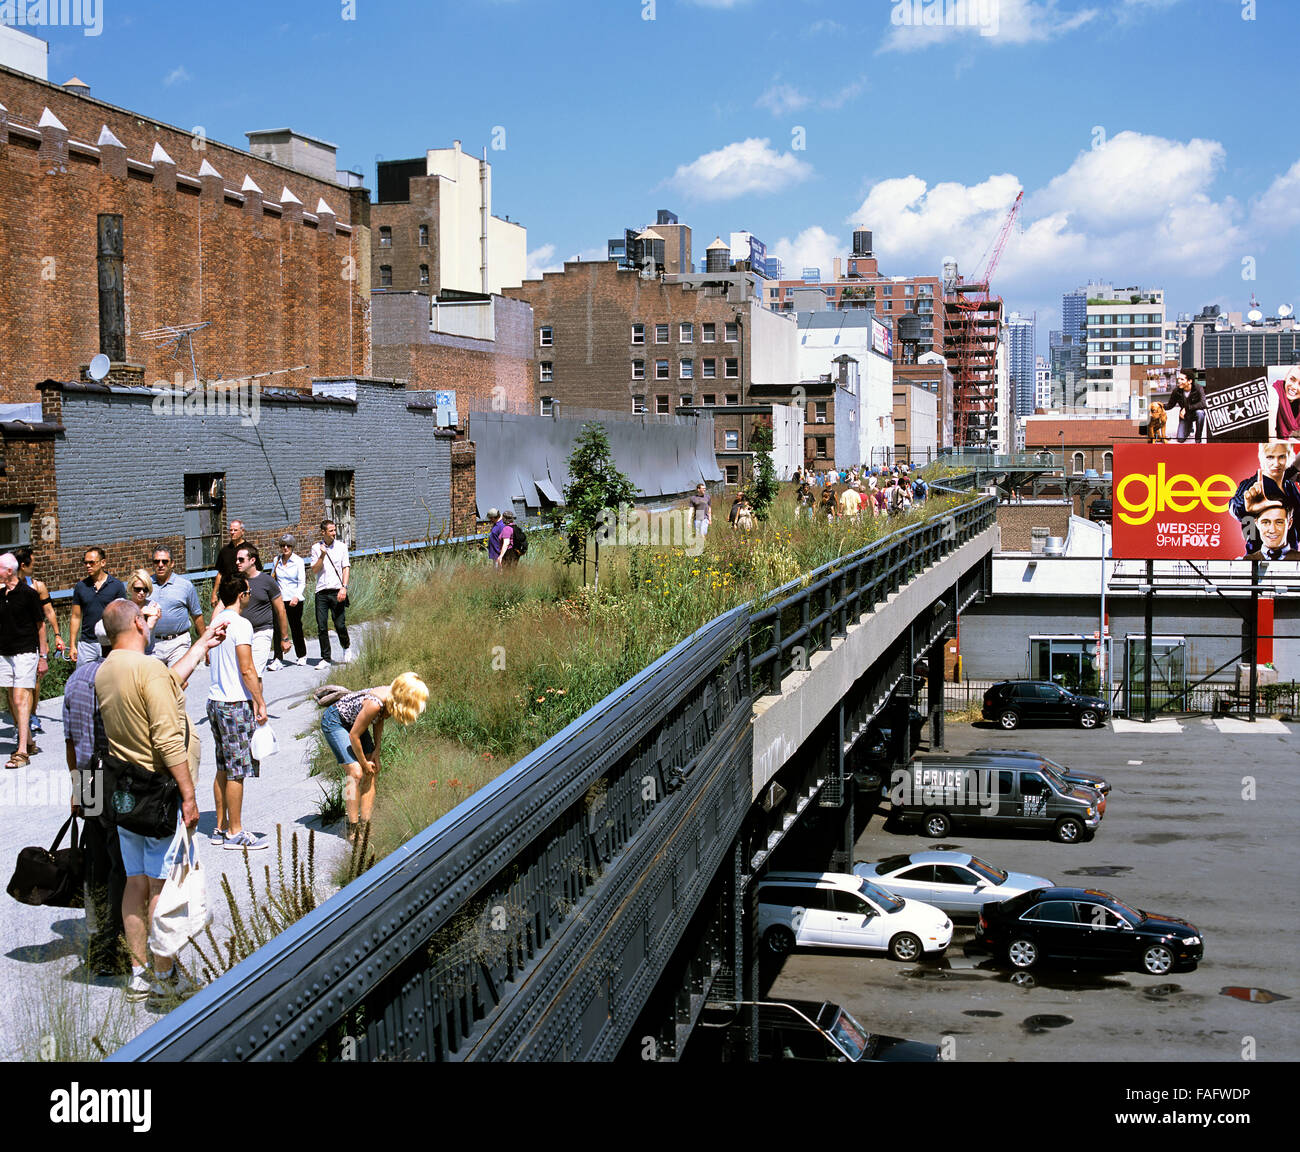 View of the High Line, Manhattan, New York - a former elevated railway line now converted into a new park and footpath route. Stock Photo